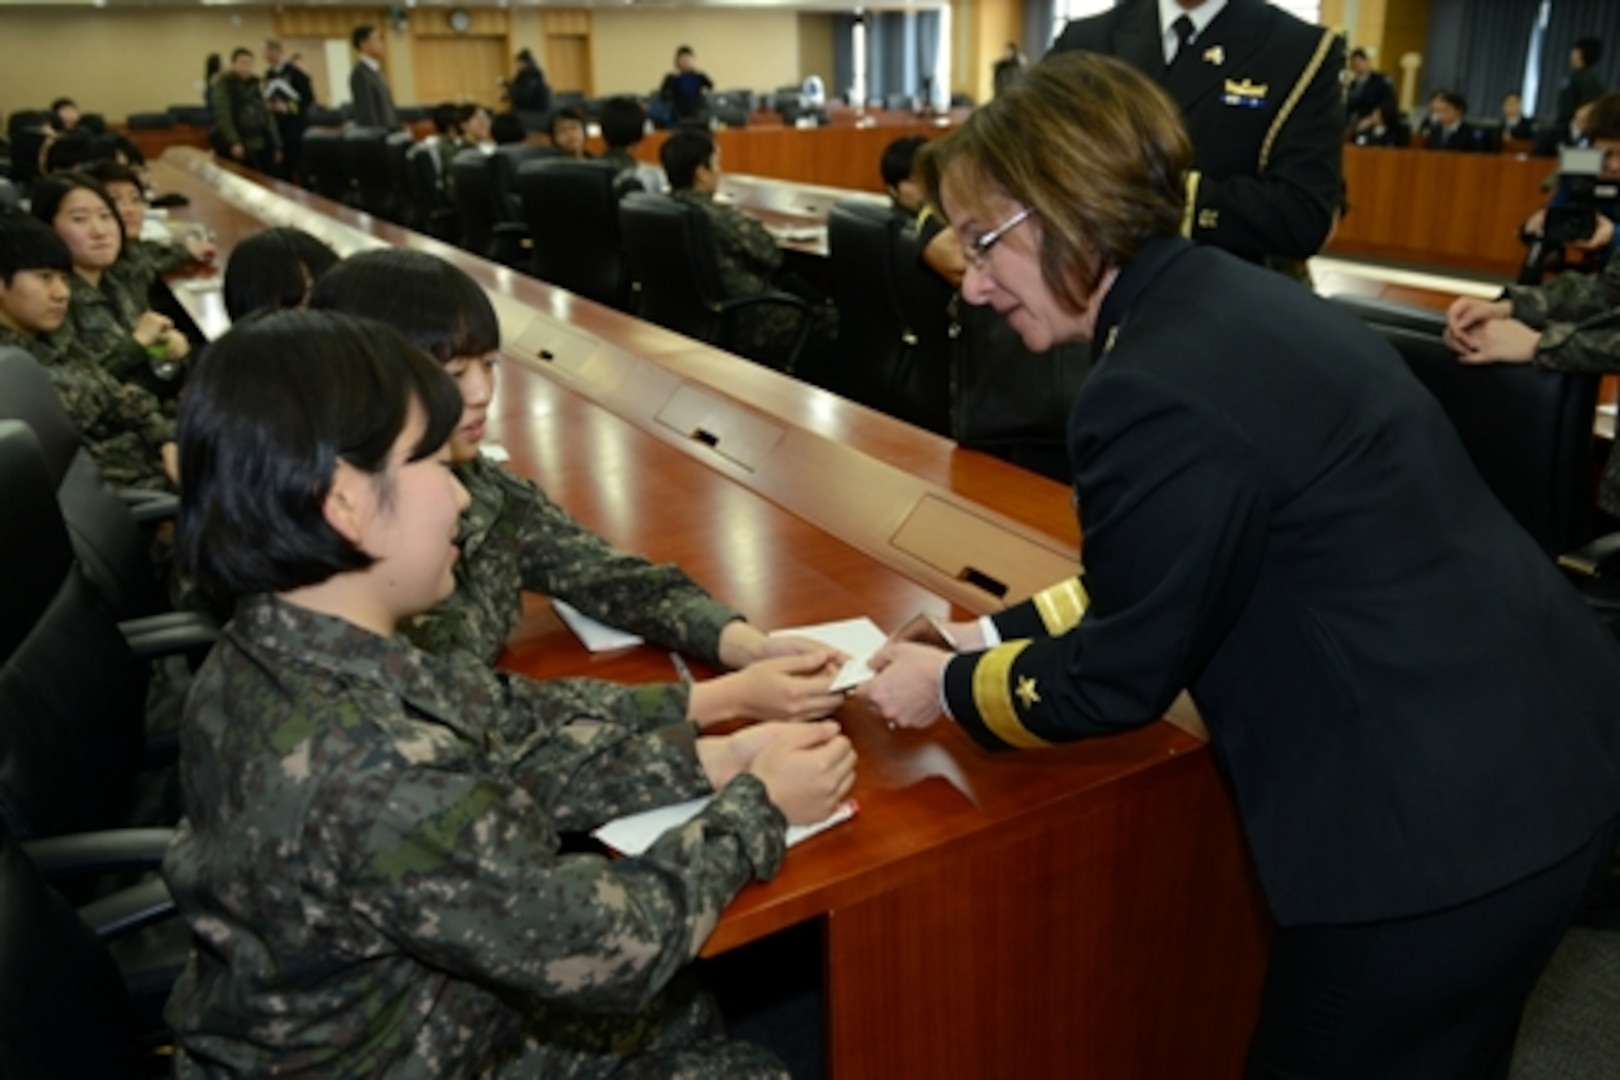 (140108_N_JN652_199) SEOUL, Republic of Korea (Jan. 8, 2014) – Rear Admiral Lisa Franchetti, Commander, U.S. Naval Forces Korea (CNFK), greets two female cadets from the 217 Reserve Officer’s Training Corps (ROTC) at Sookmyung University, Jan 8 after her lecture discussing her command philosophy and ideas on career development in the military.  (U.S. Navy Photo by Chief Mass Communication Specialist Wendy Wyman/Released)